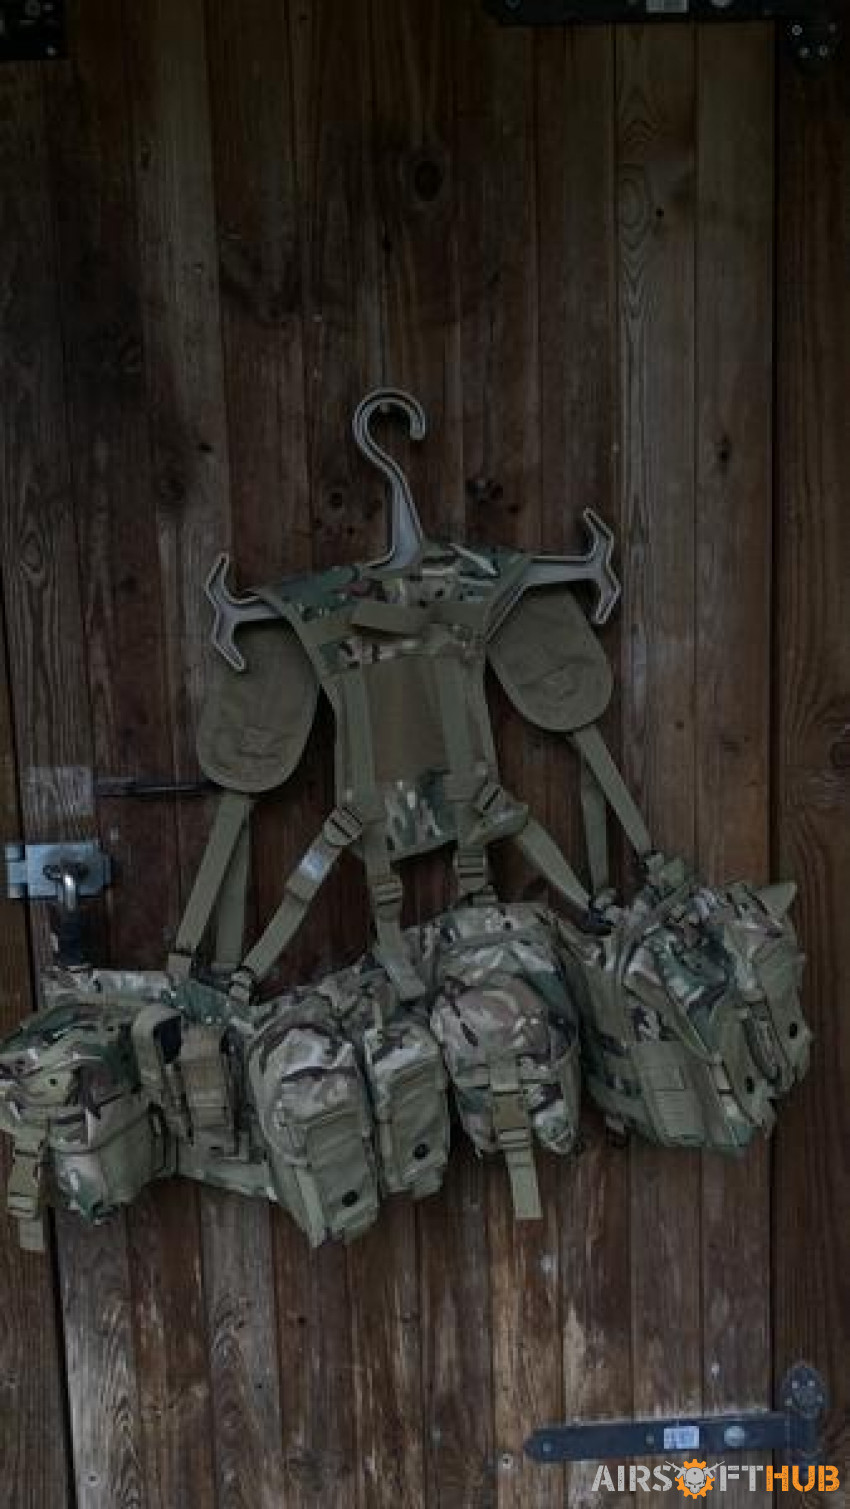 kombat tactical webbing&pouche - Used airsoft equipment